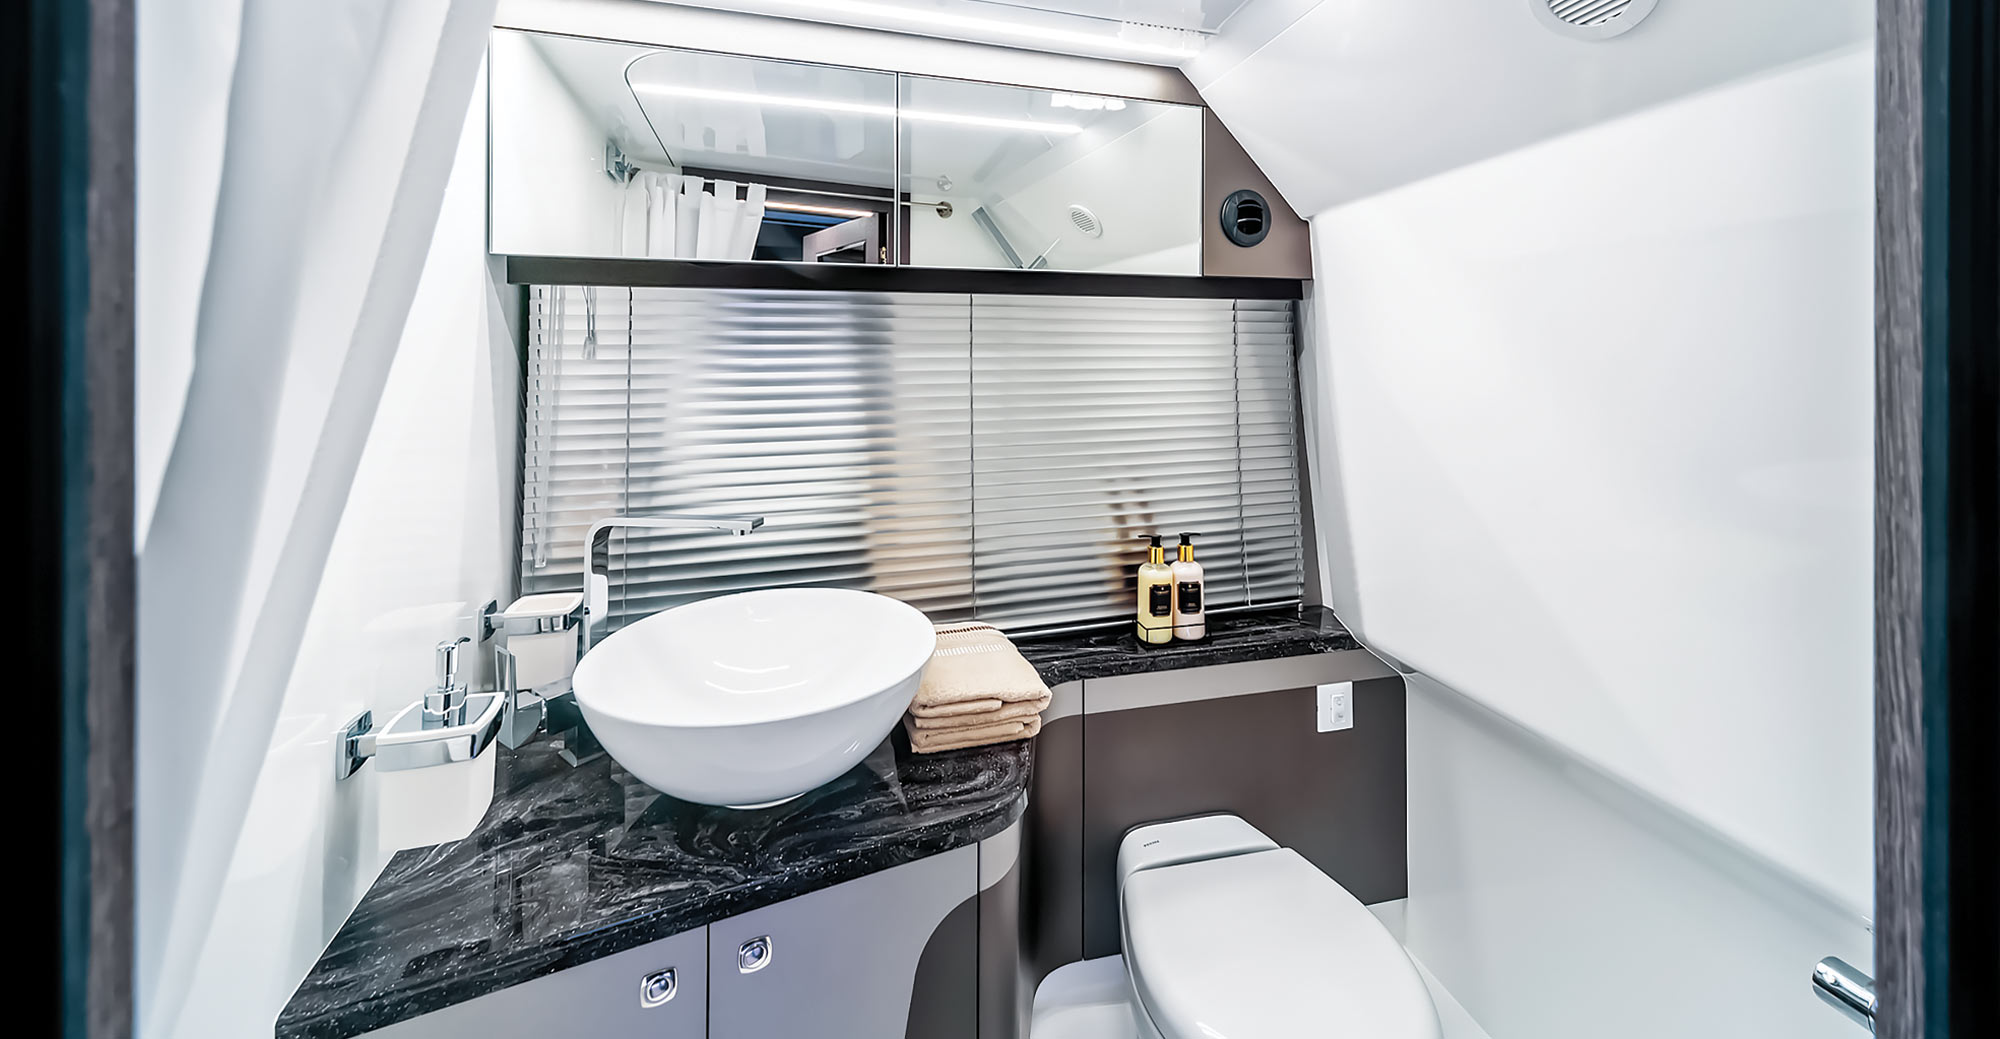 view of toilet, sink and counter of boat bathroom